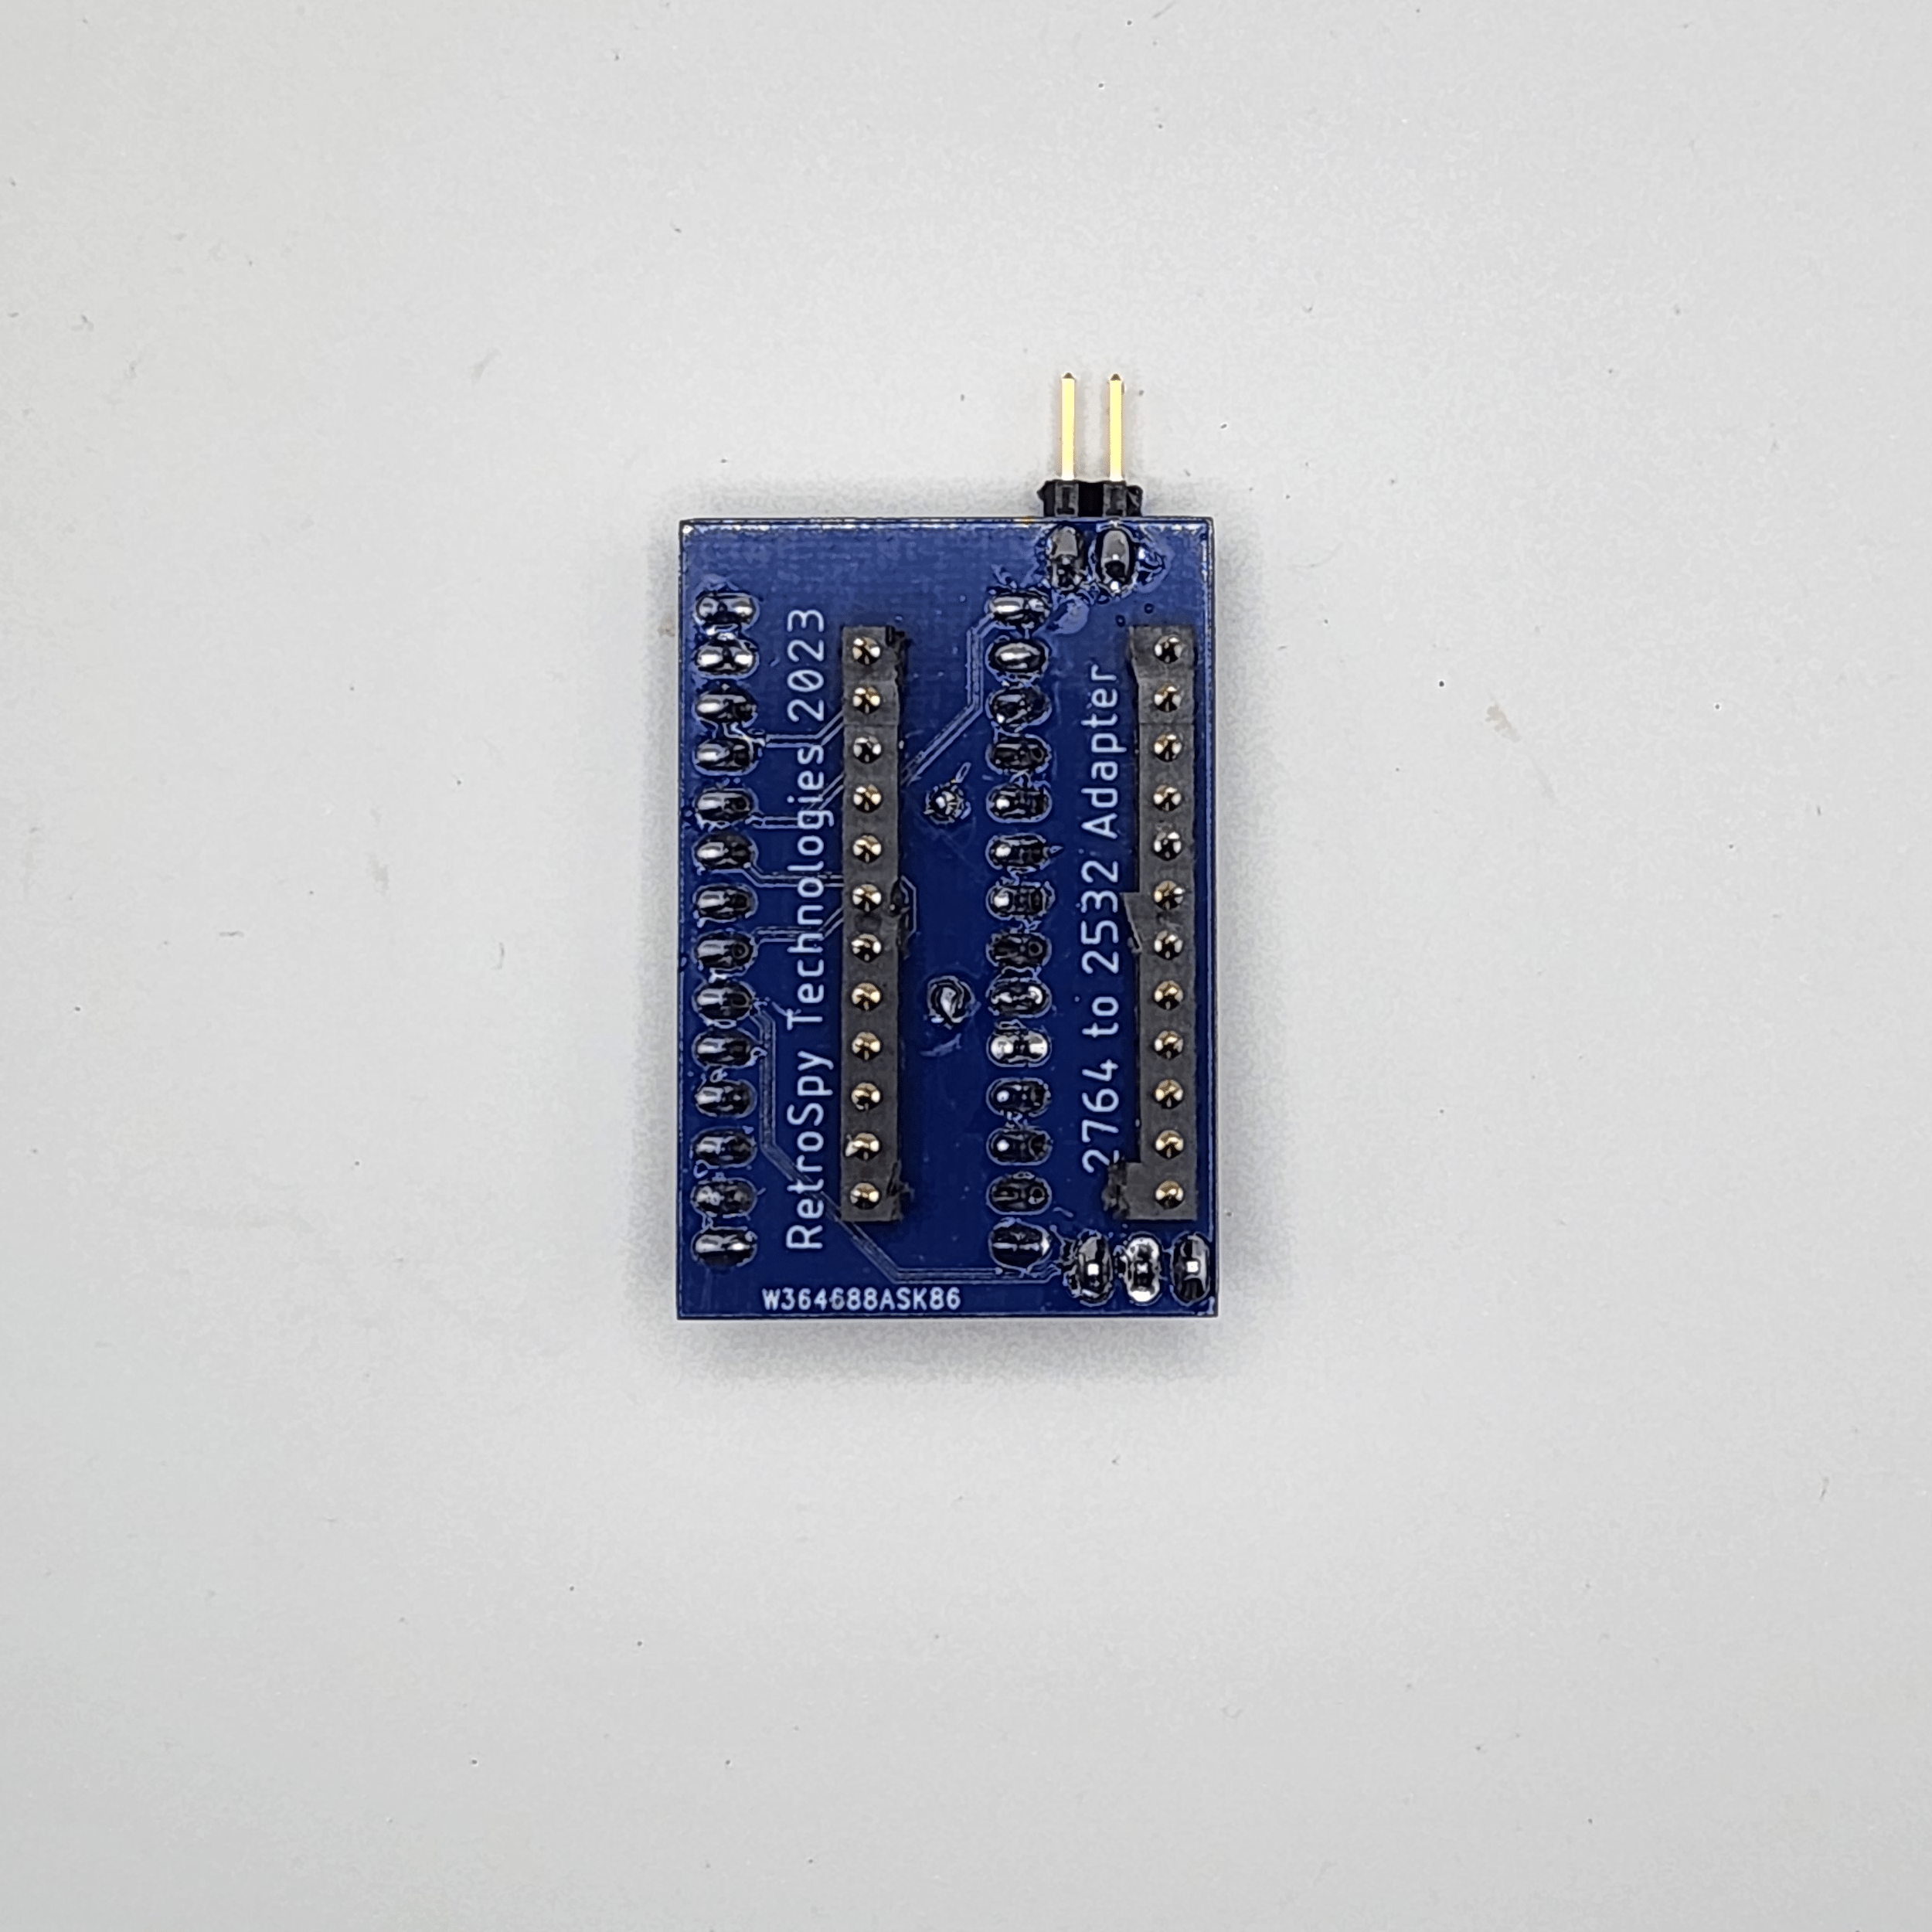 Bottom of 2532 to 2764 EPROM Adapter